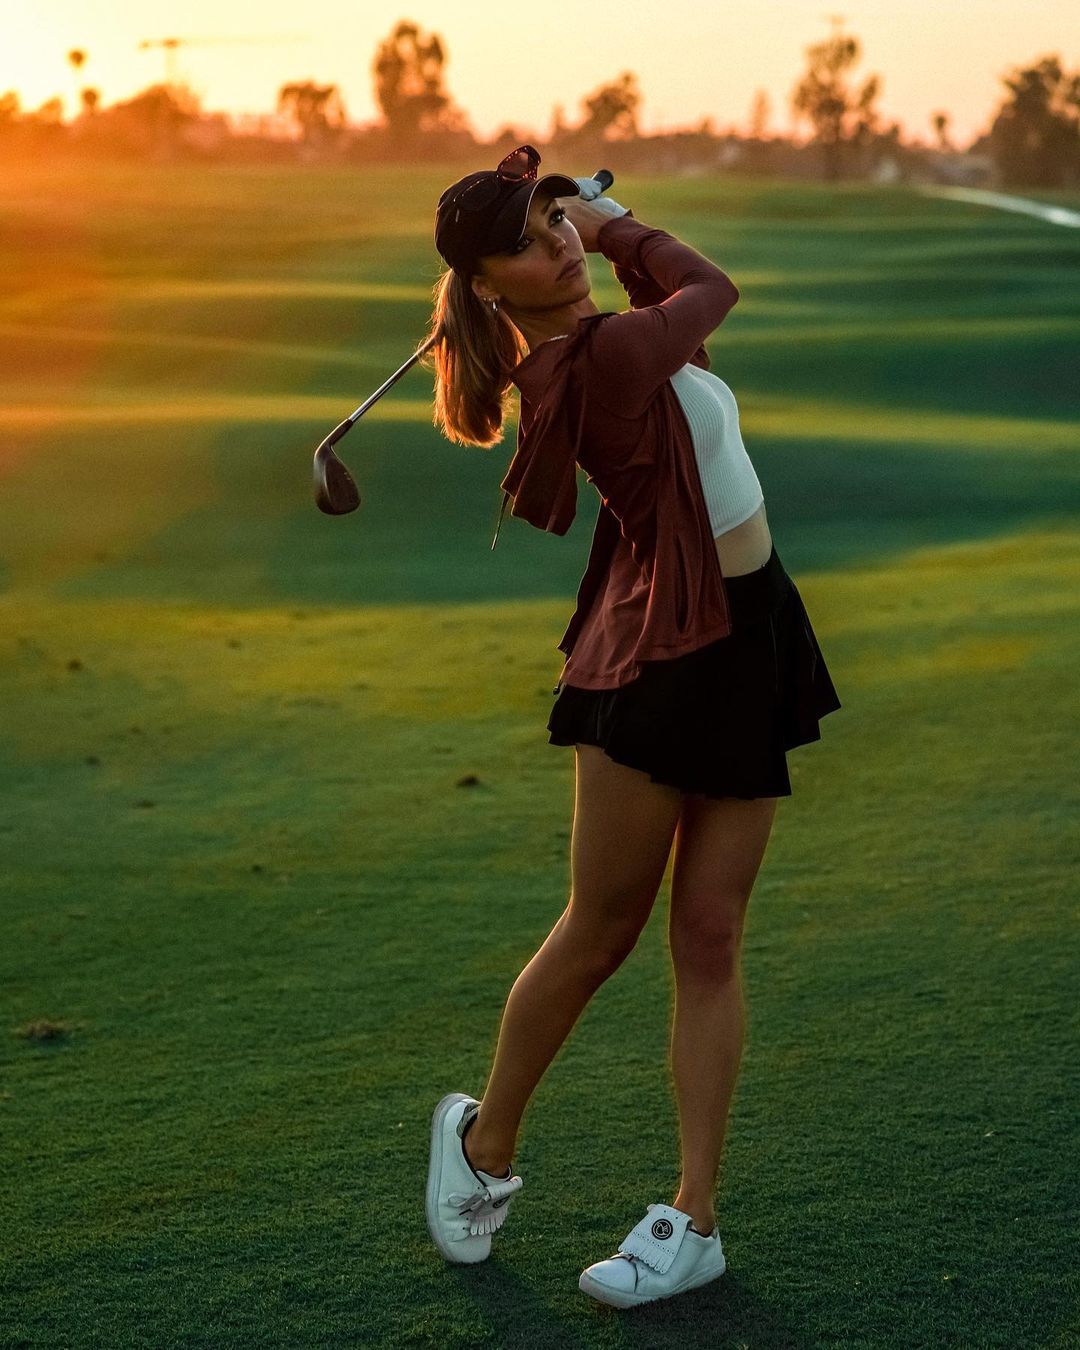 Photos n°13 : Claire Hogle is the Golf Influencer!